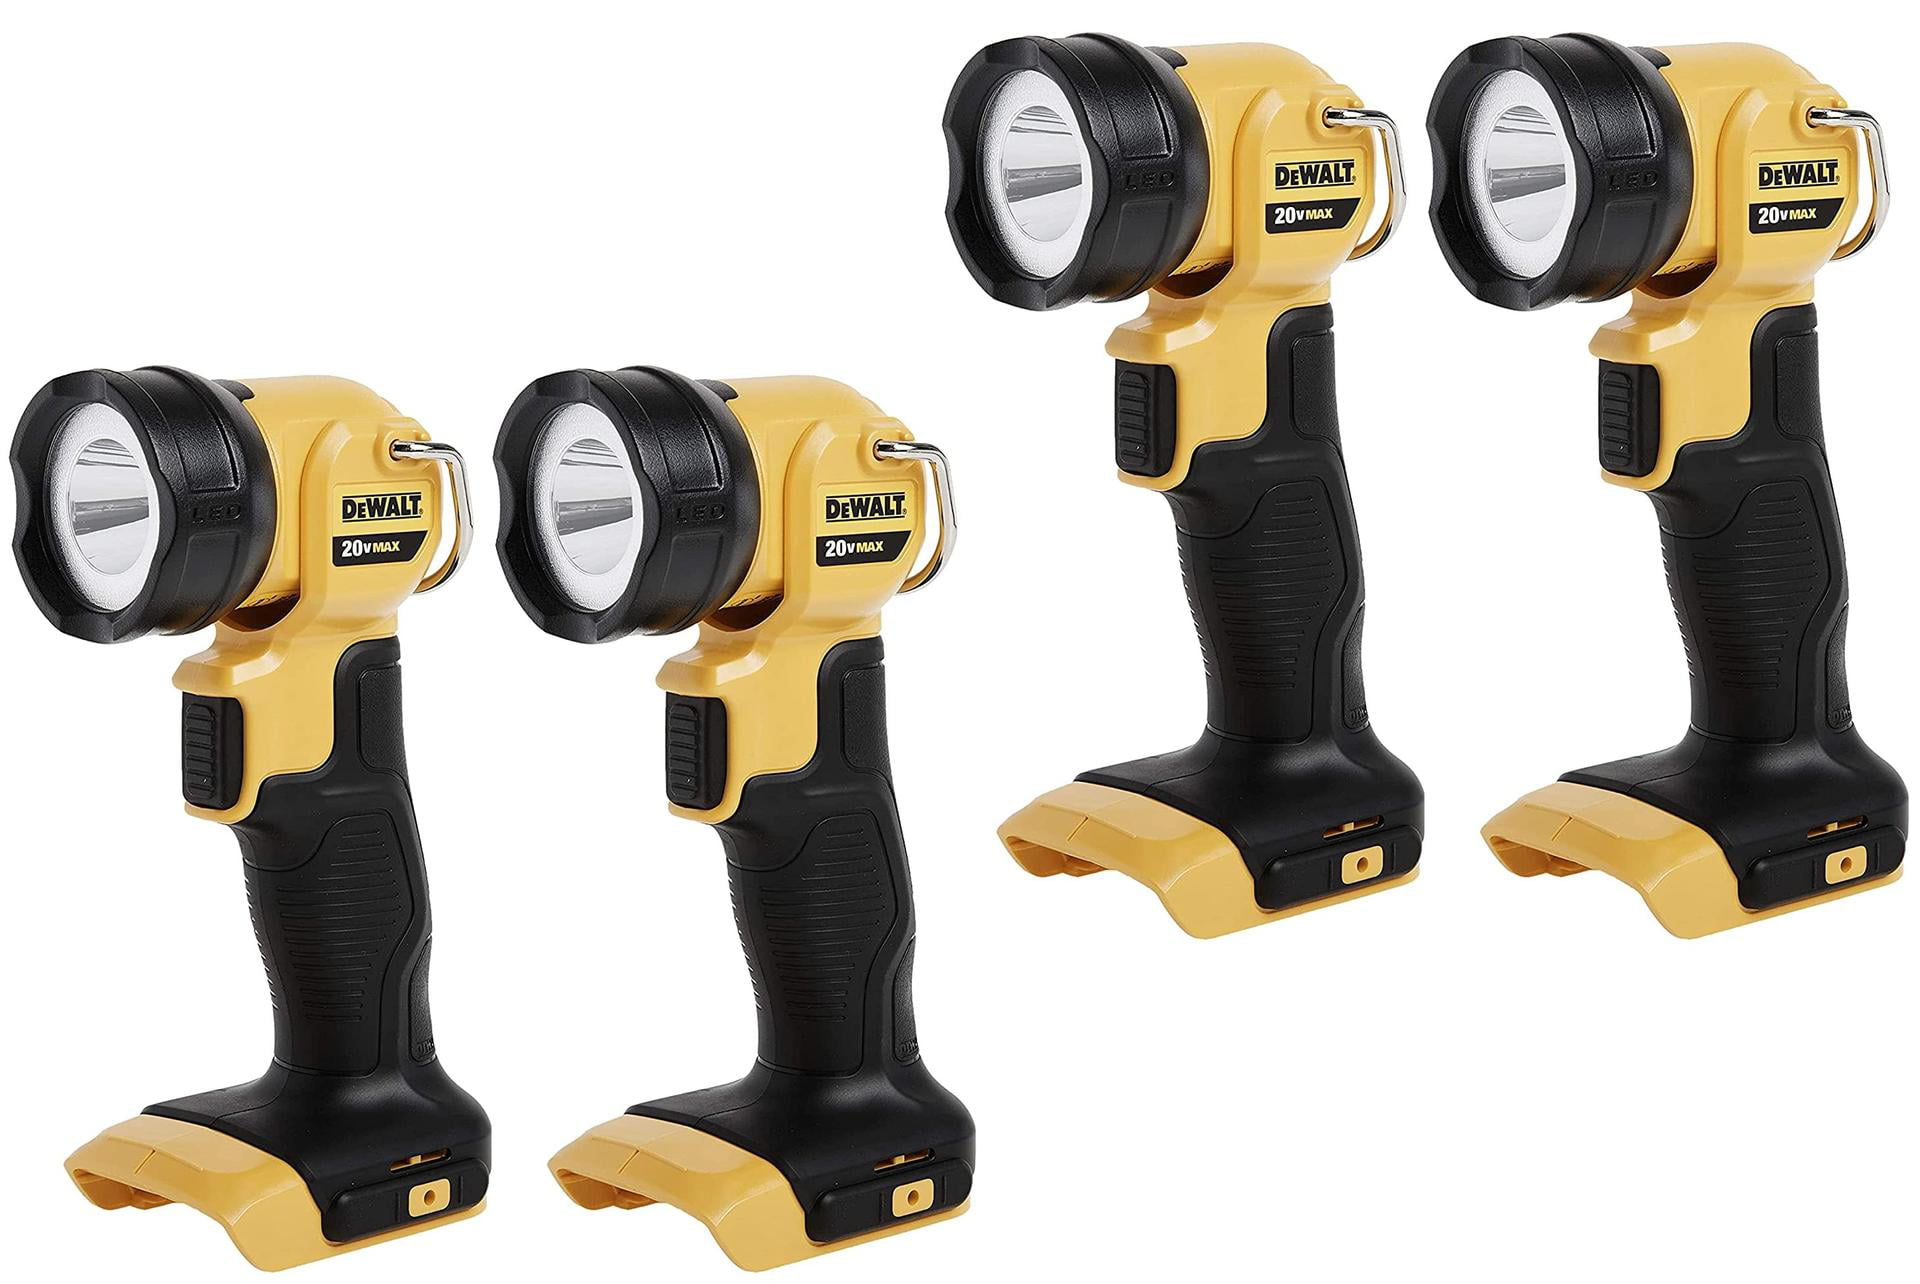 DCL040 Tool DeWALT 20V MAX Cordless Lithium-Ion LED Work Light Tool Only 